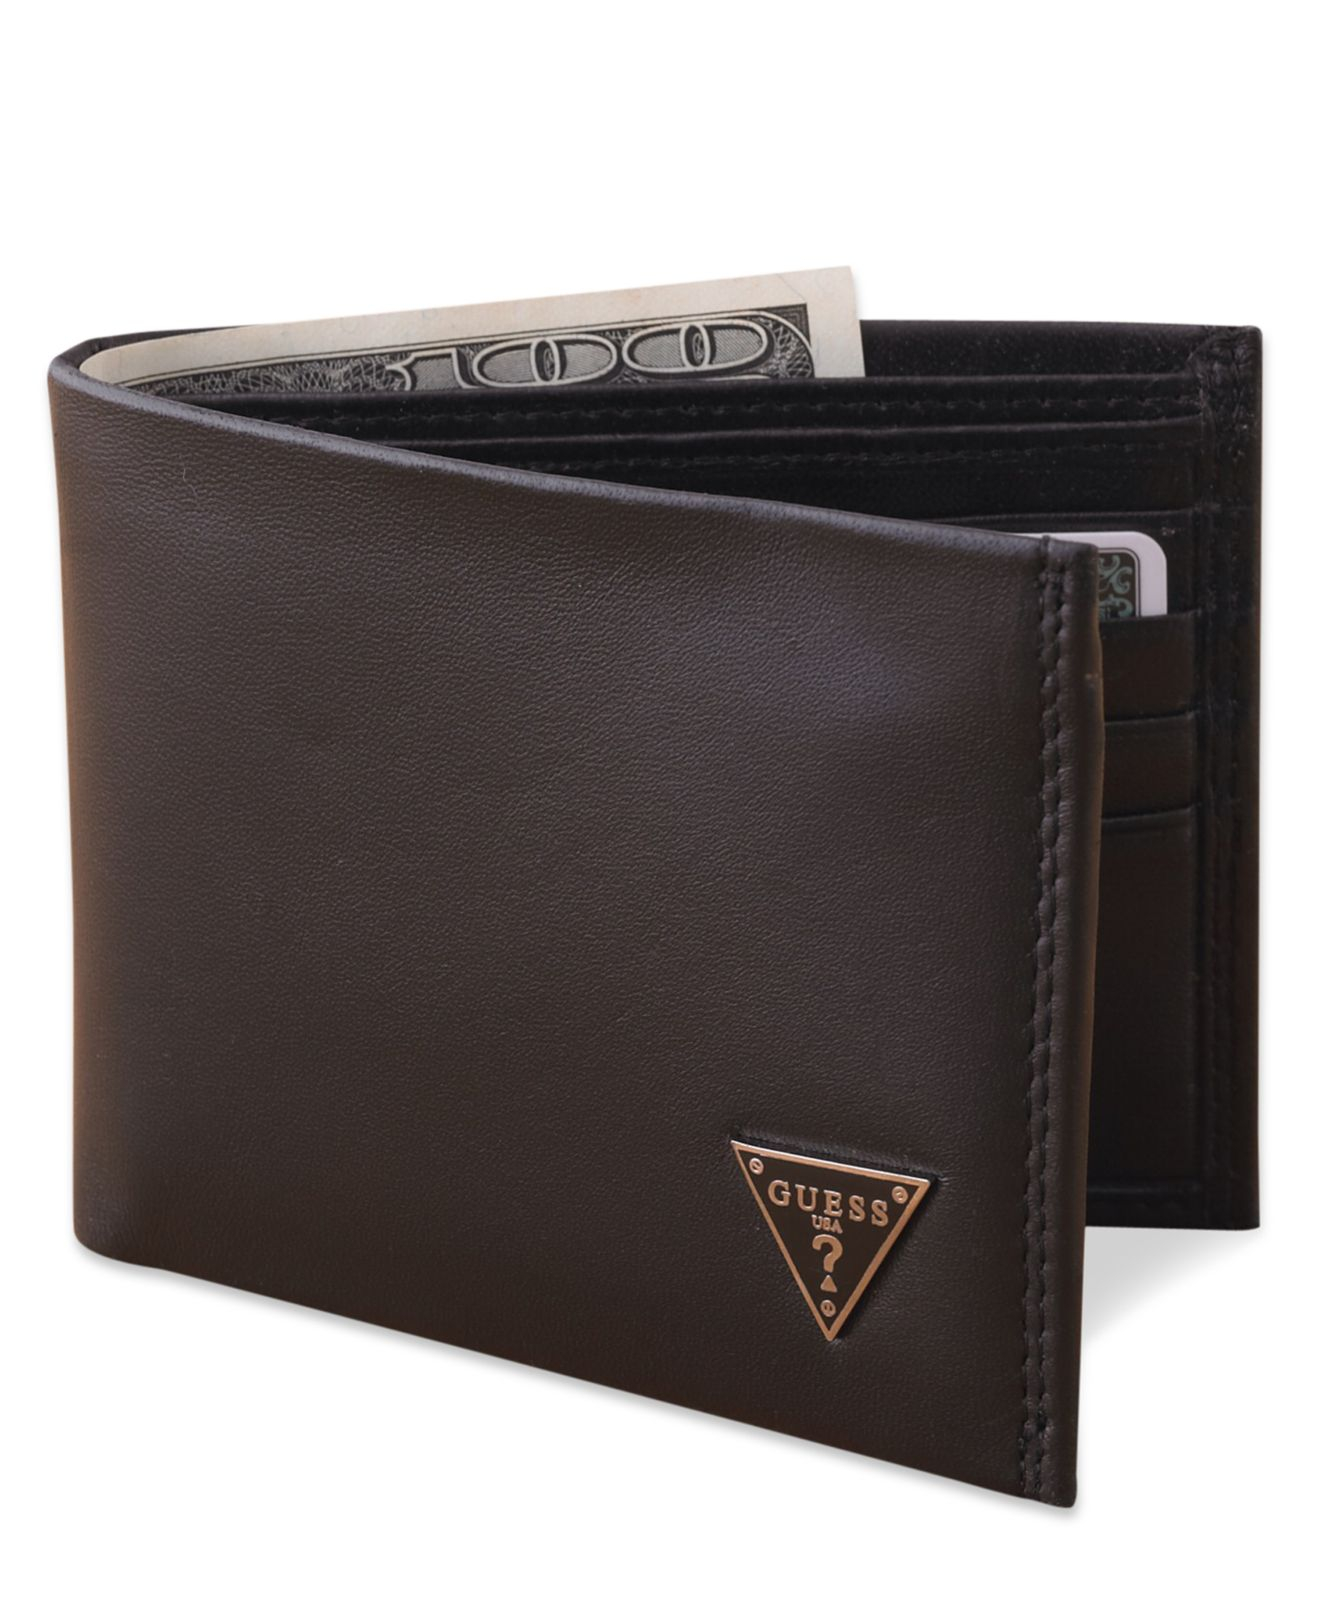 Guess Cruz Leather Bifold Wallet in Black for Men - Save 25% | Lyst